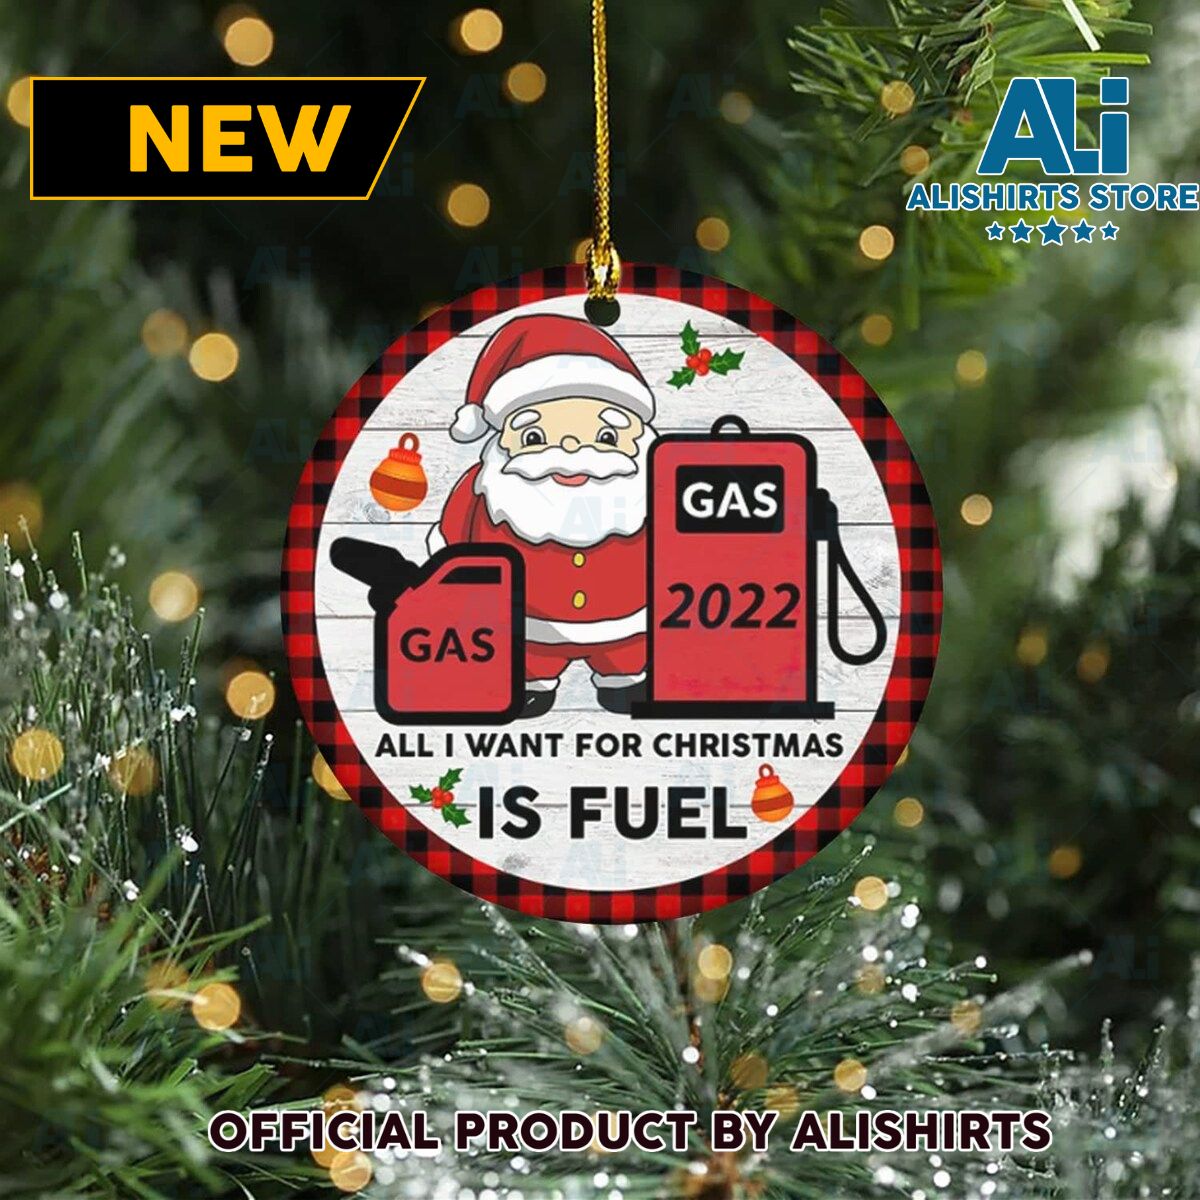 All I Want For Christmas Is Fuel Santa Claus Ornament 2022